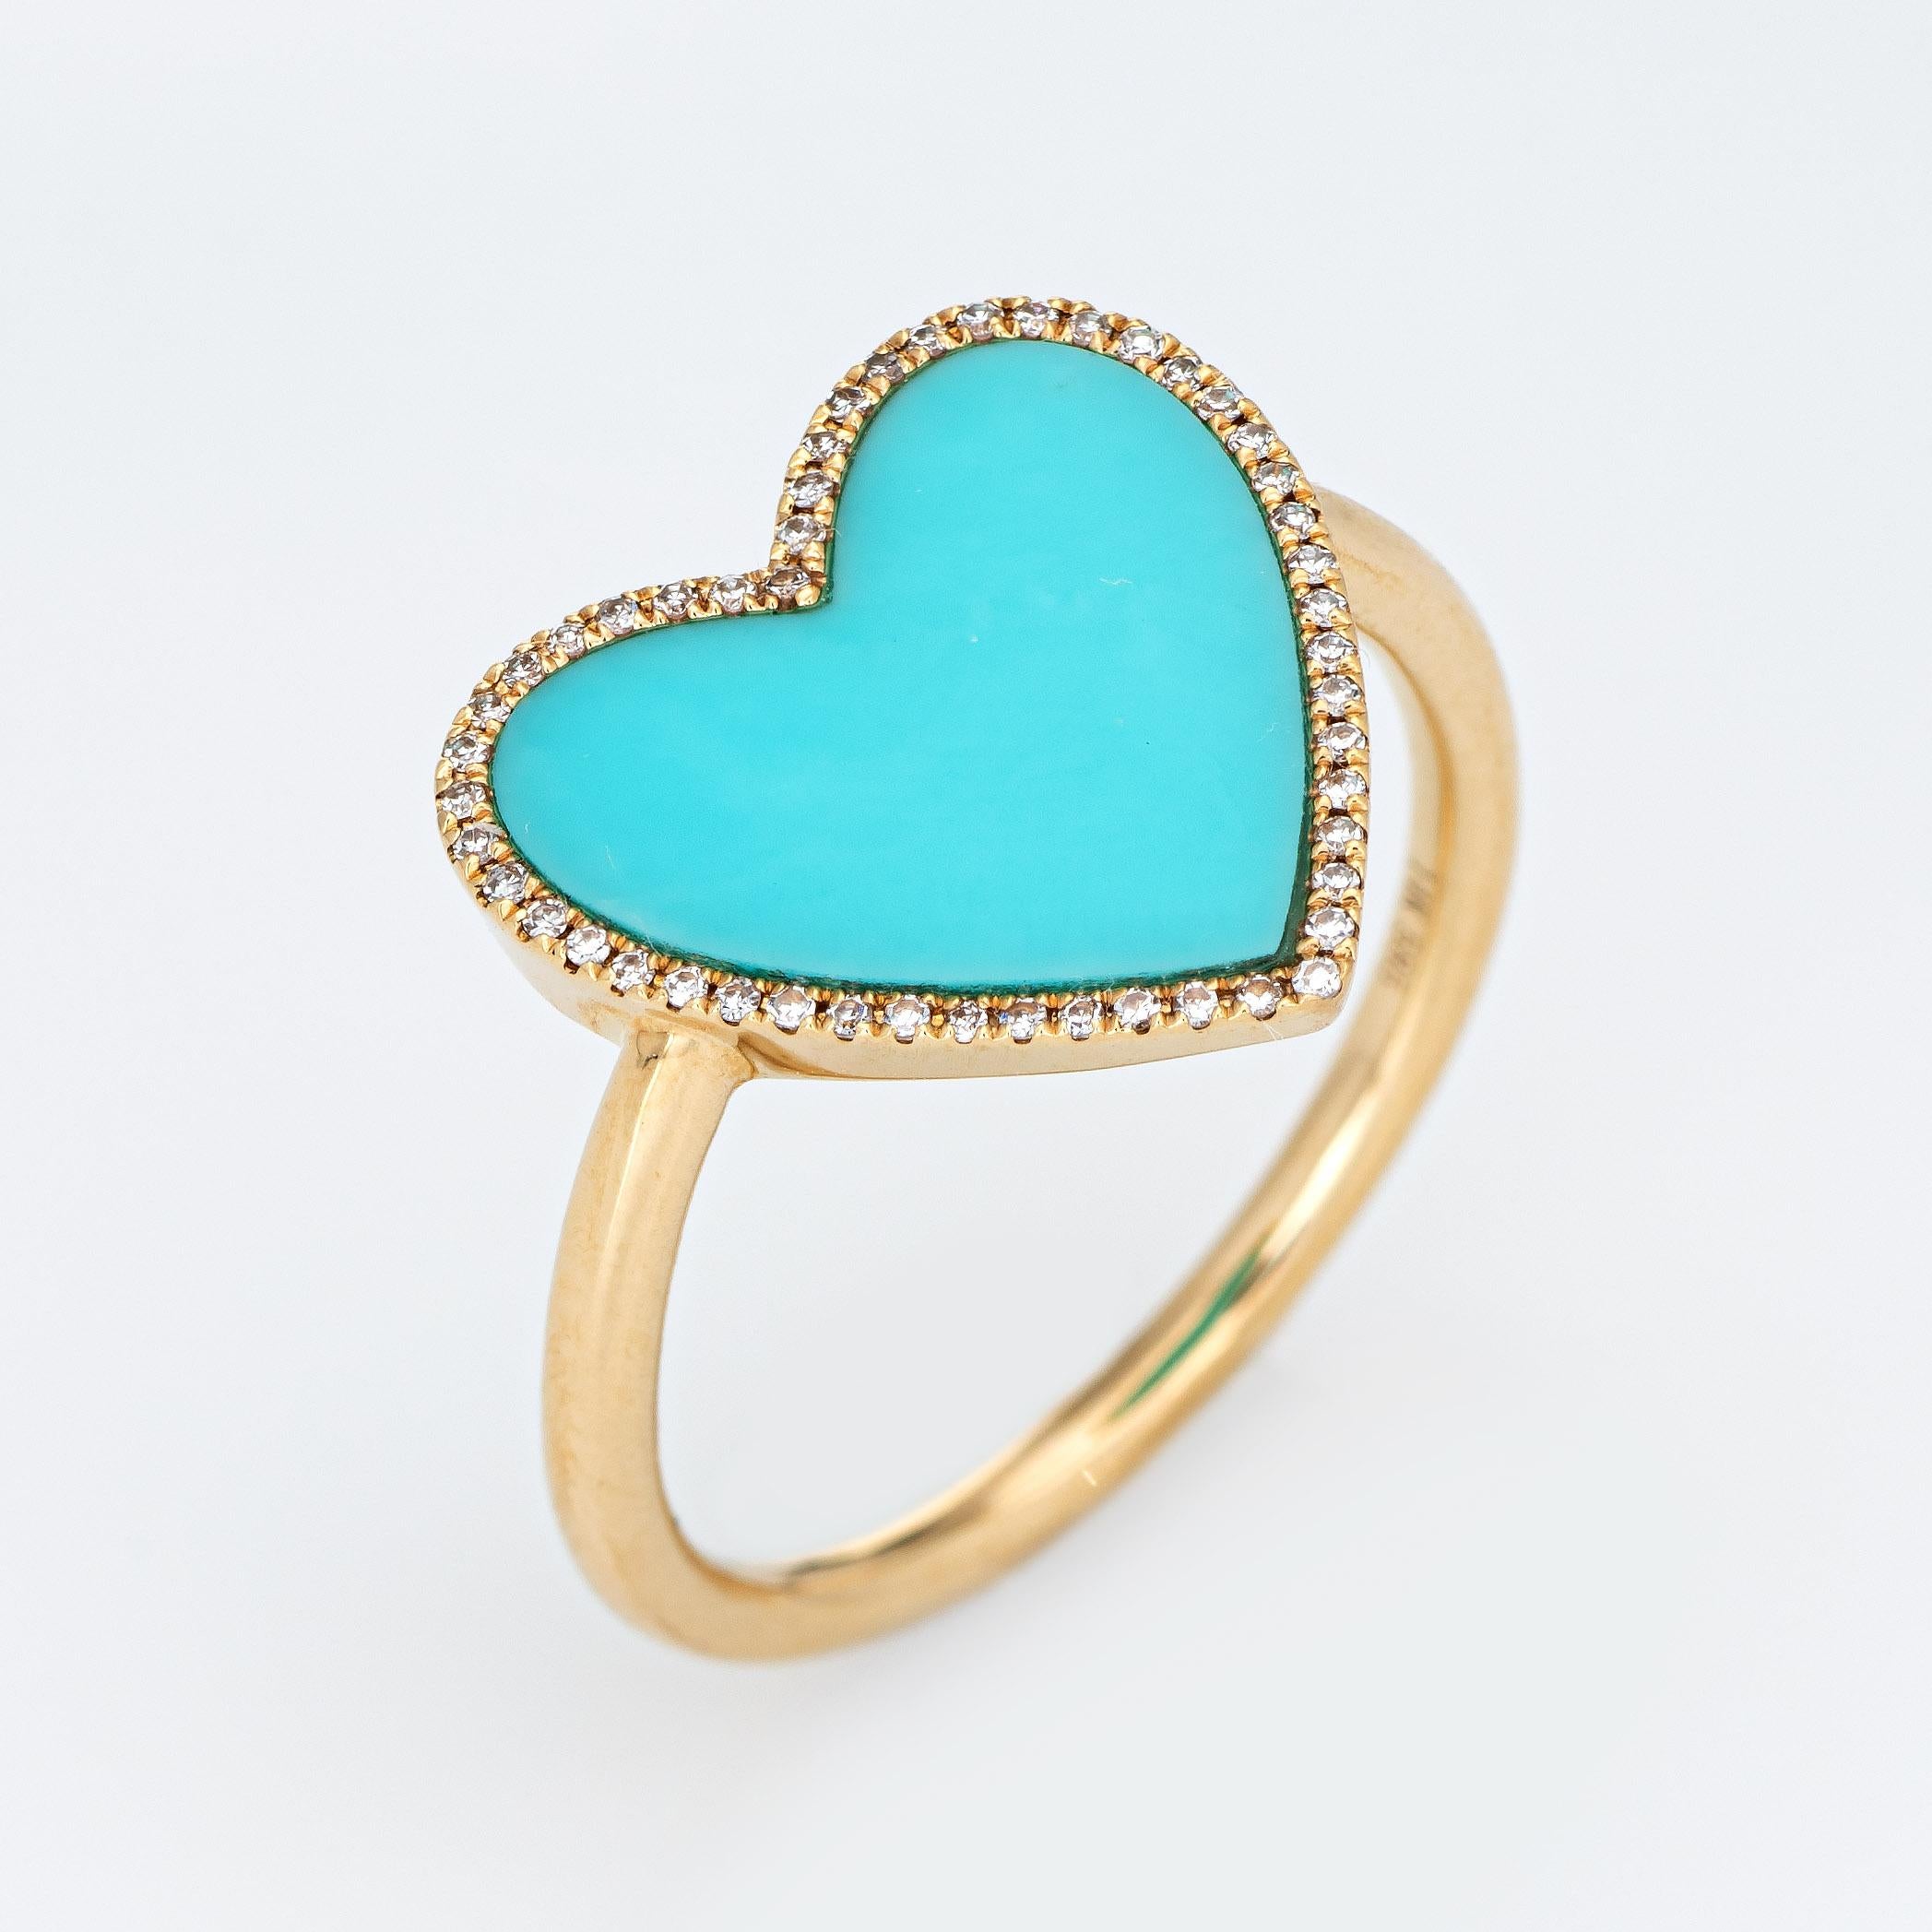 Stylish turquoise & diamond heart ring crafted in 14 karat yellow gold. 

Turquoise measures 12mm (in excellent condition and free of cracks or chips). Diamonds total an estimated 0.09 carats (estimated at H-I color and VS2-SI2 clarity). 

The egg